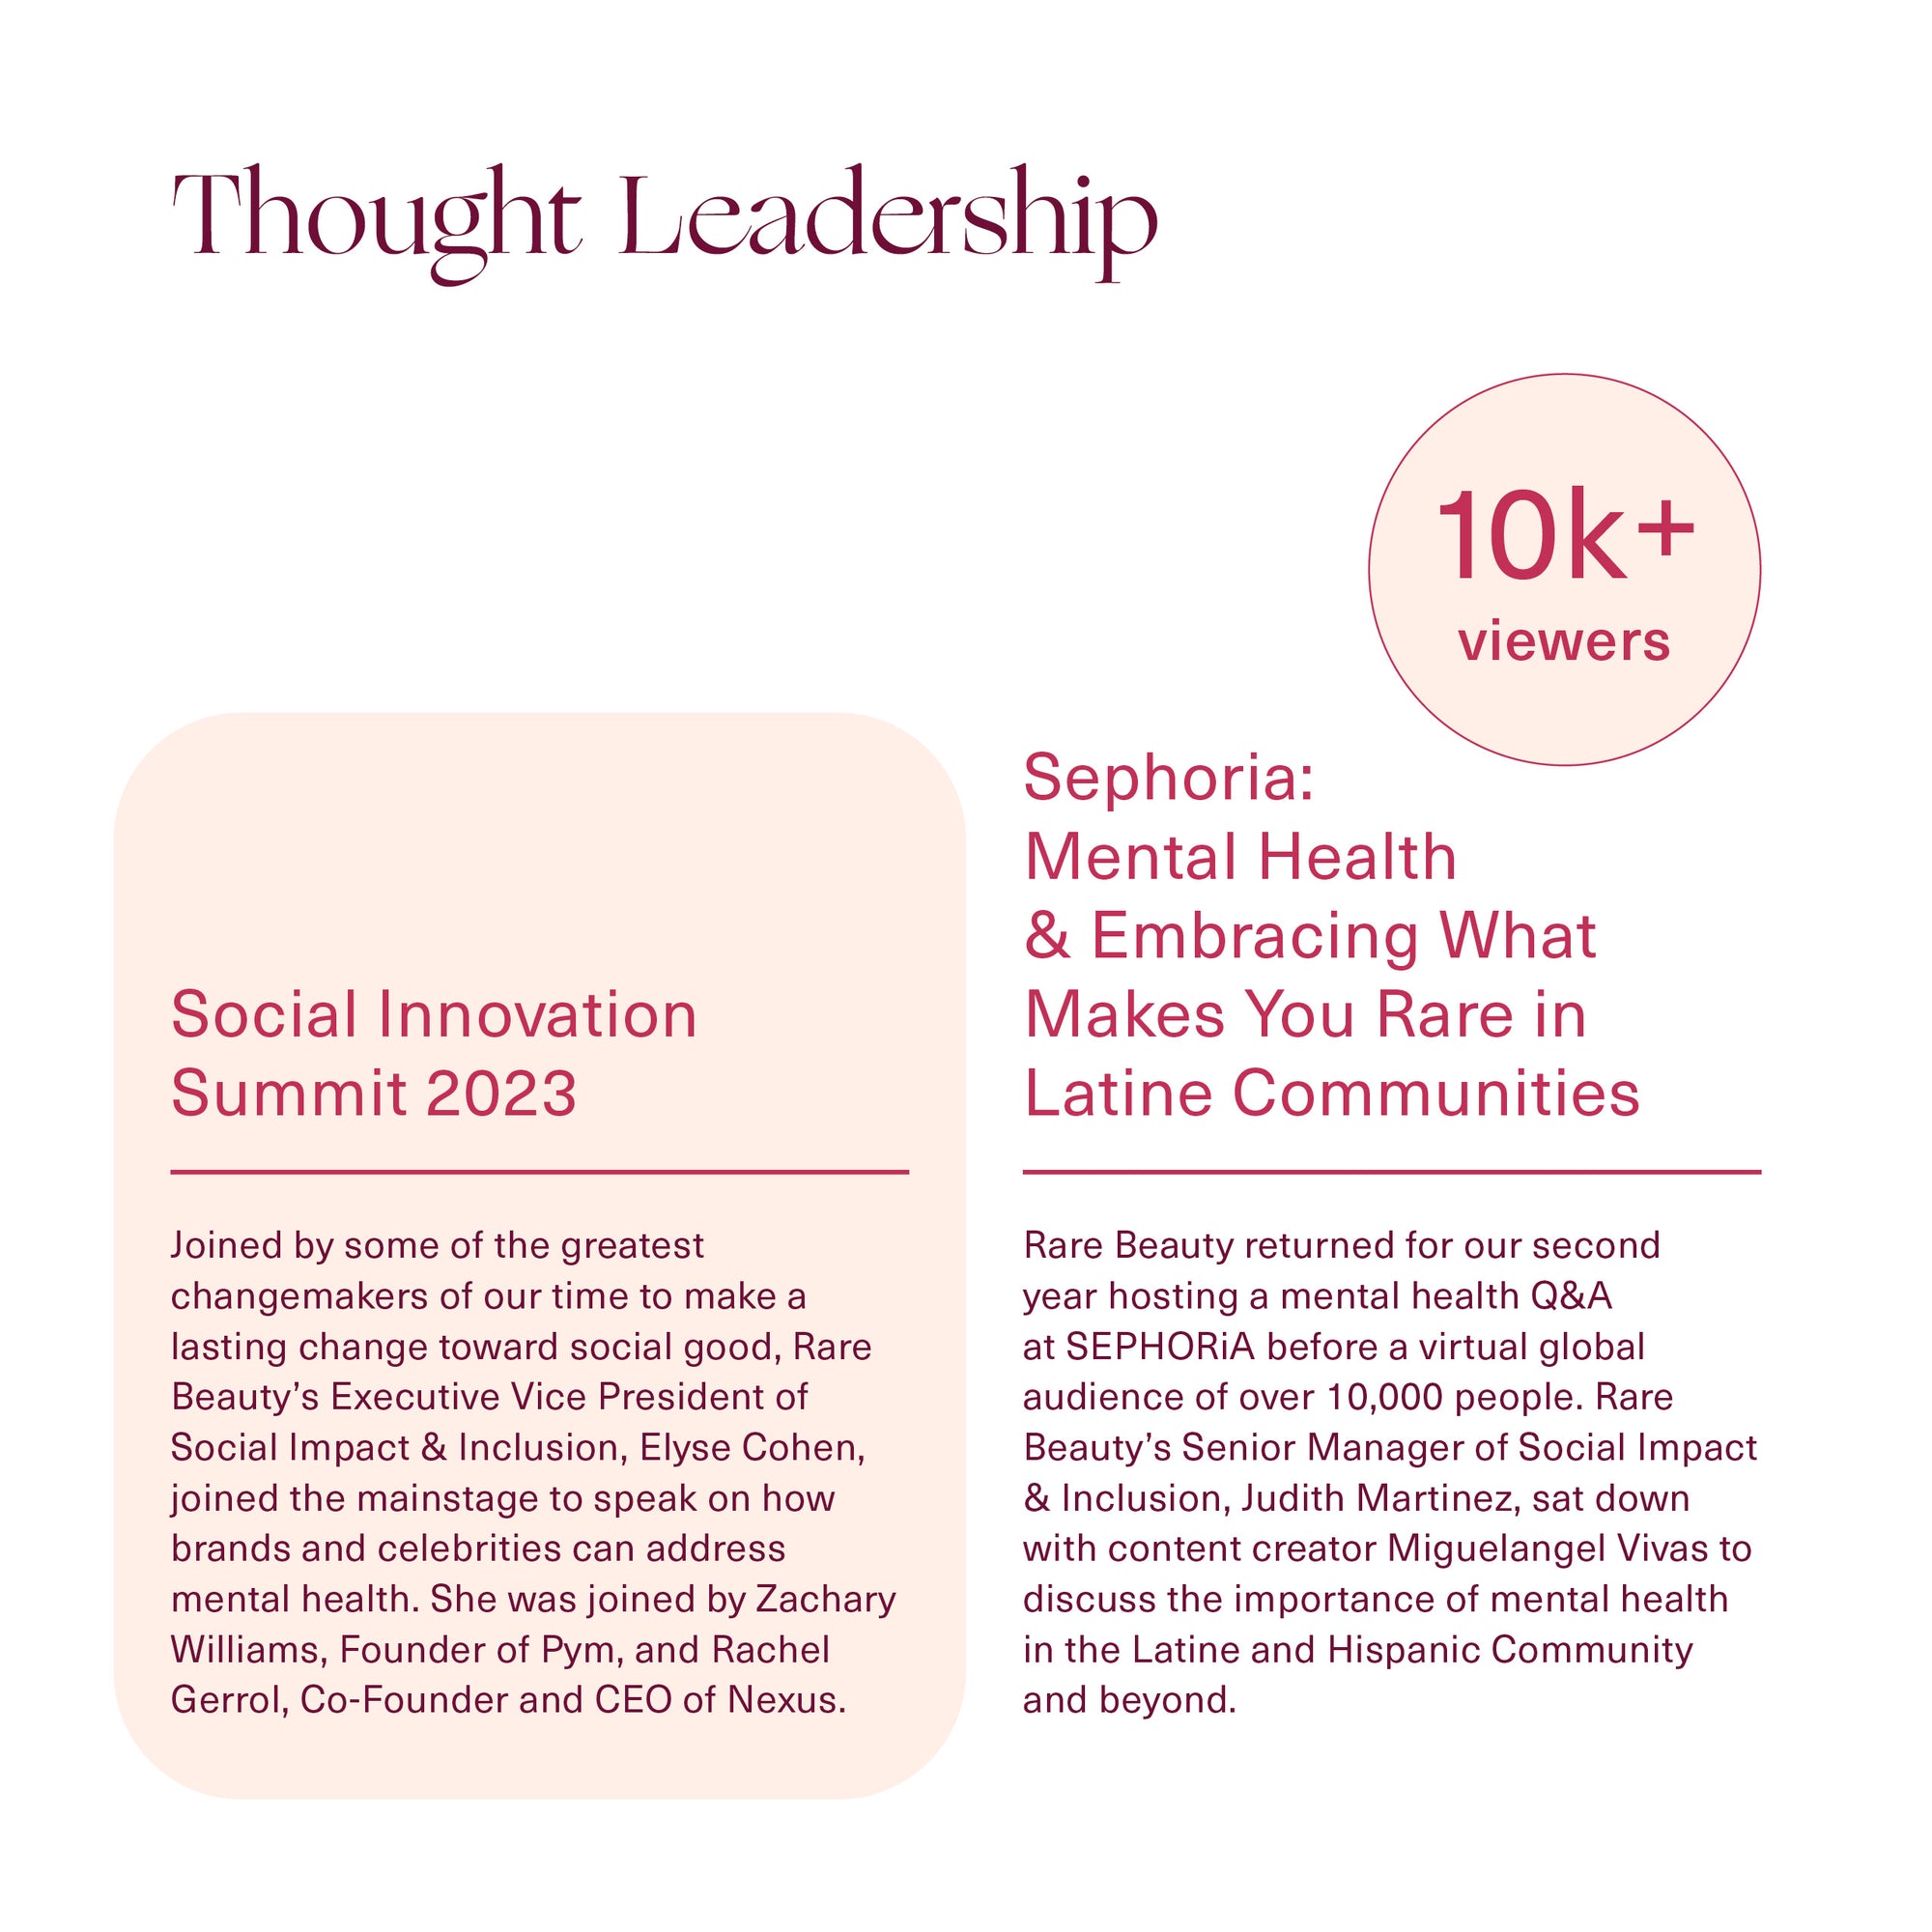 Thought Leadership - 10k+ viewers for Social Innovation Summit